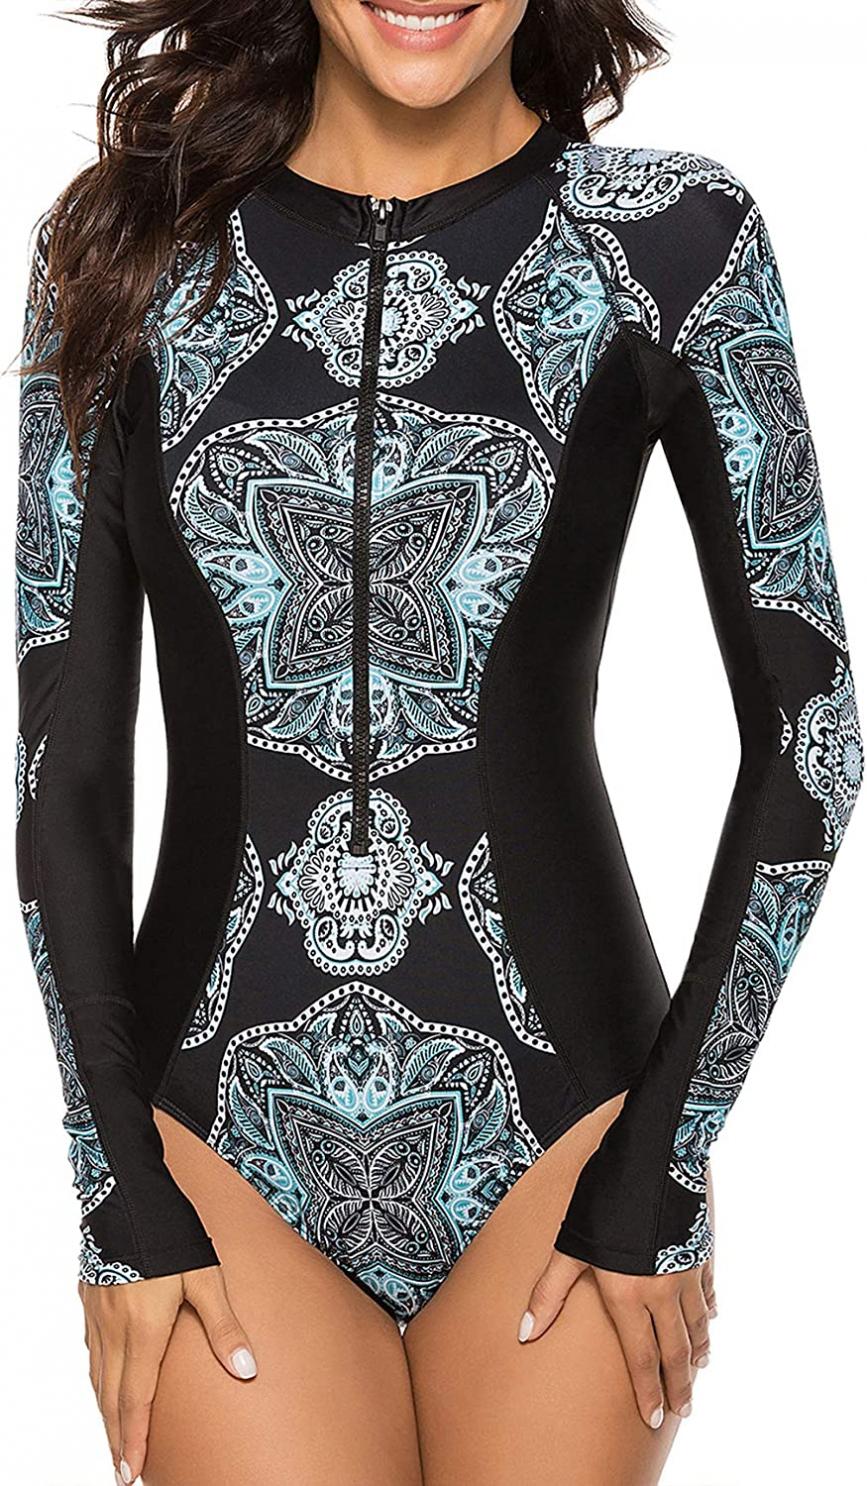 Womens Athletic One Piece Swimsuits Long Sleeve Swimsuit Sports Surfing Swimwear Bathing Suits